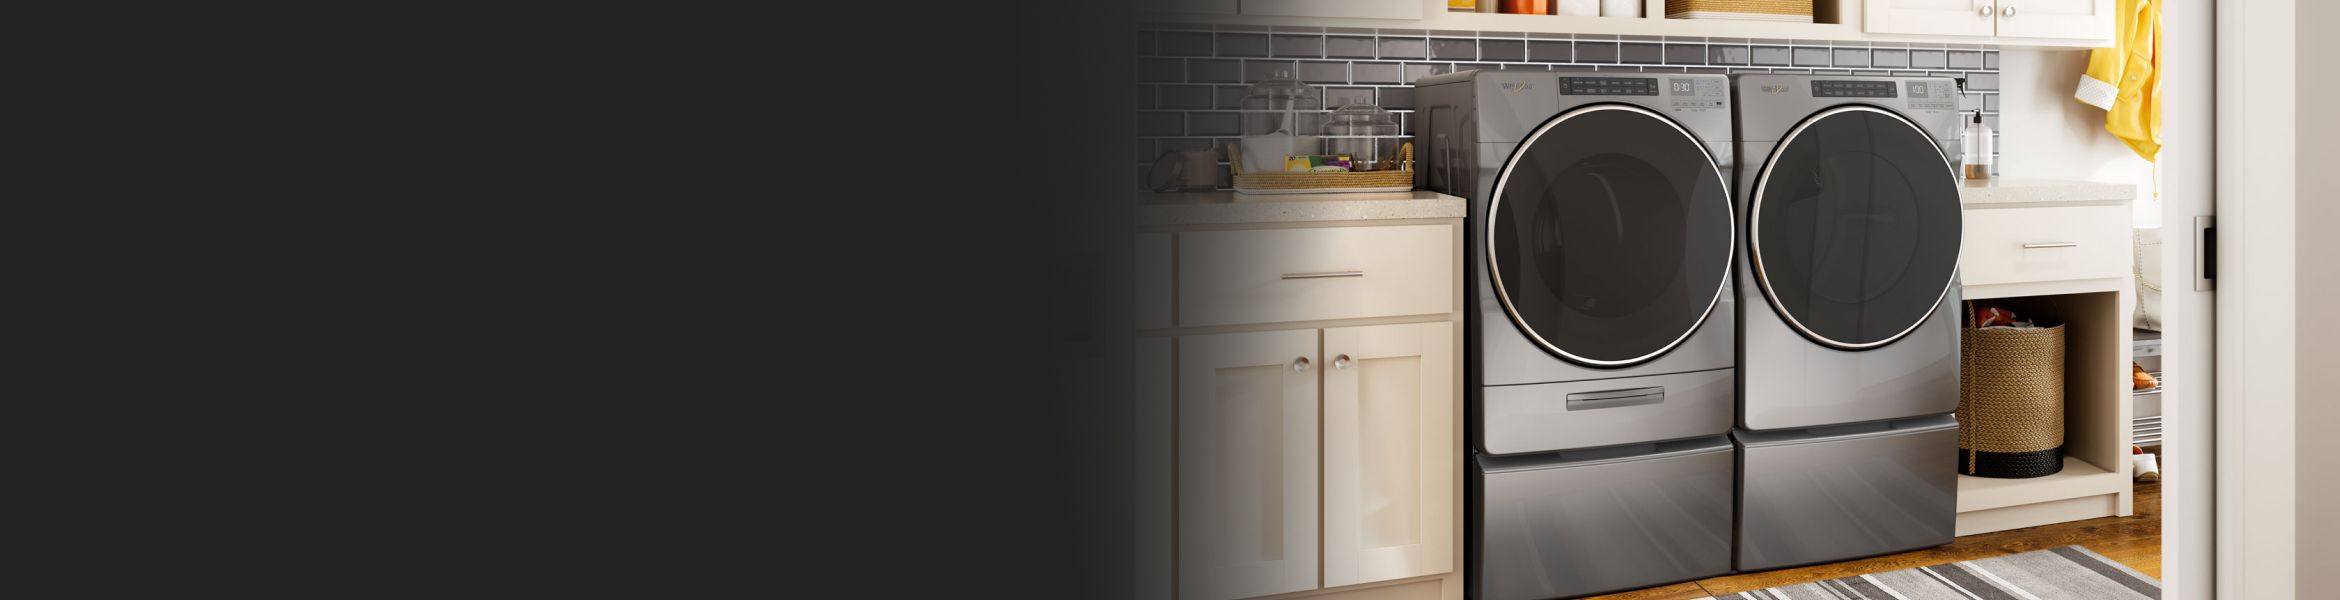 A Whirlpool® Washer and Dryer in a laundry room